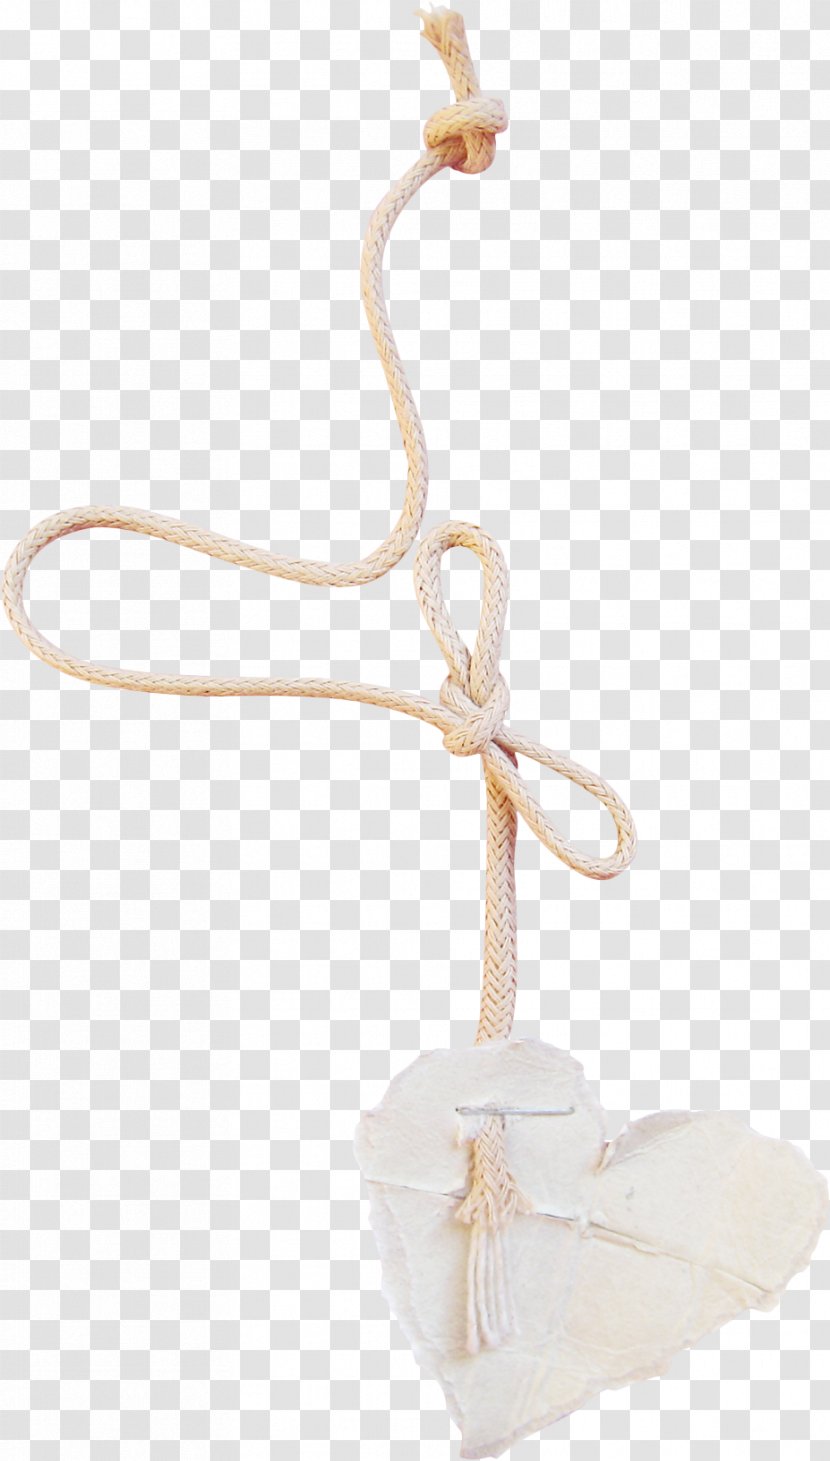 Beige - Rope Peach Heart Transparent PNG